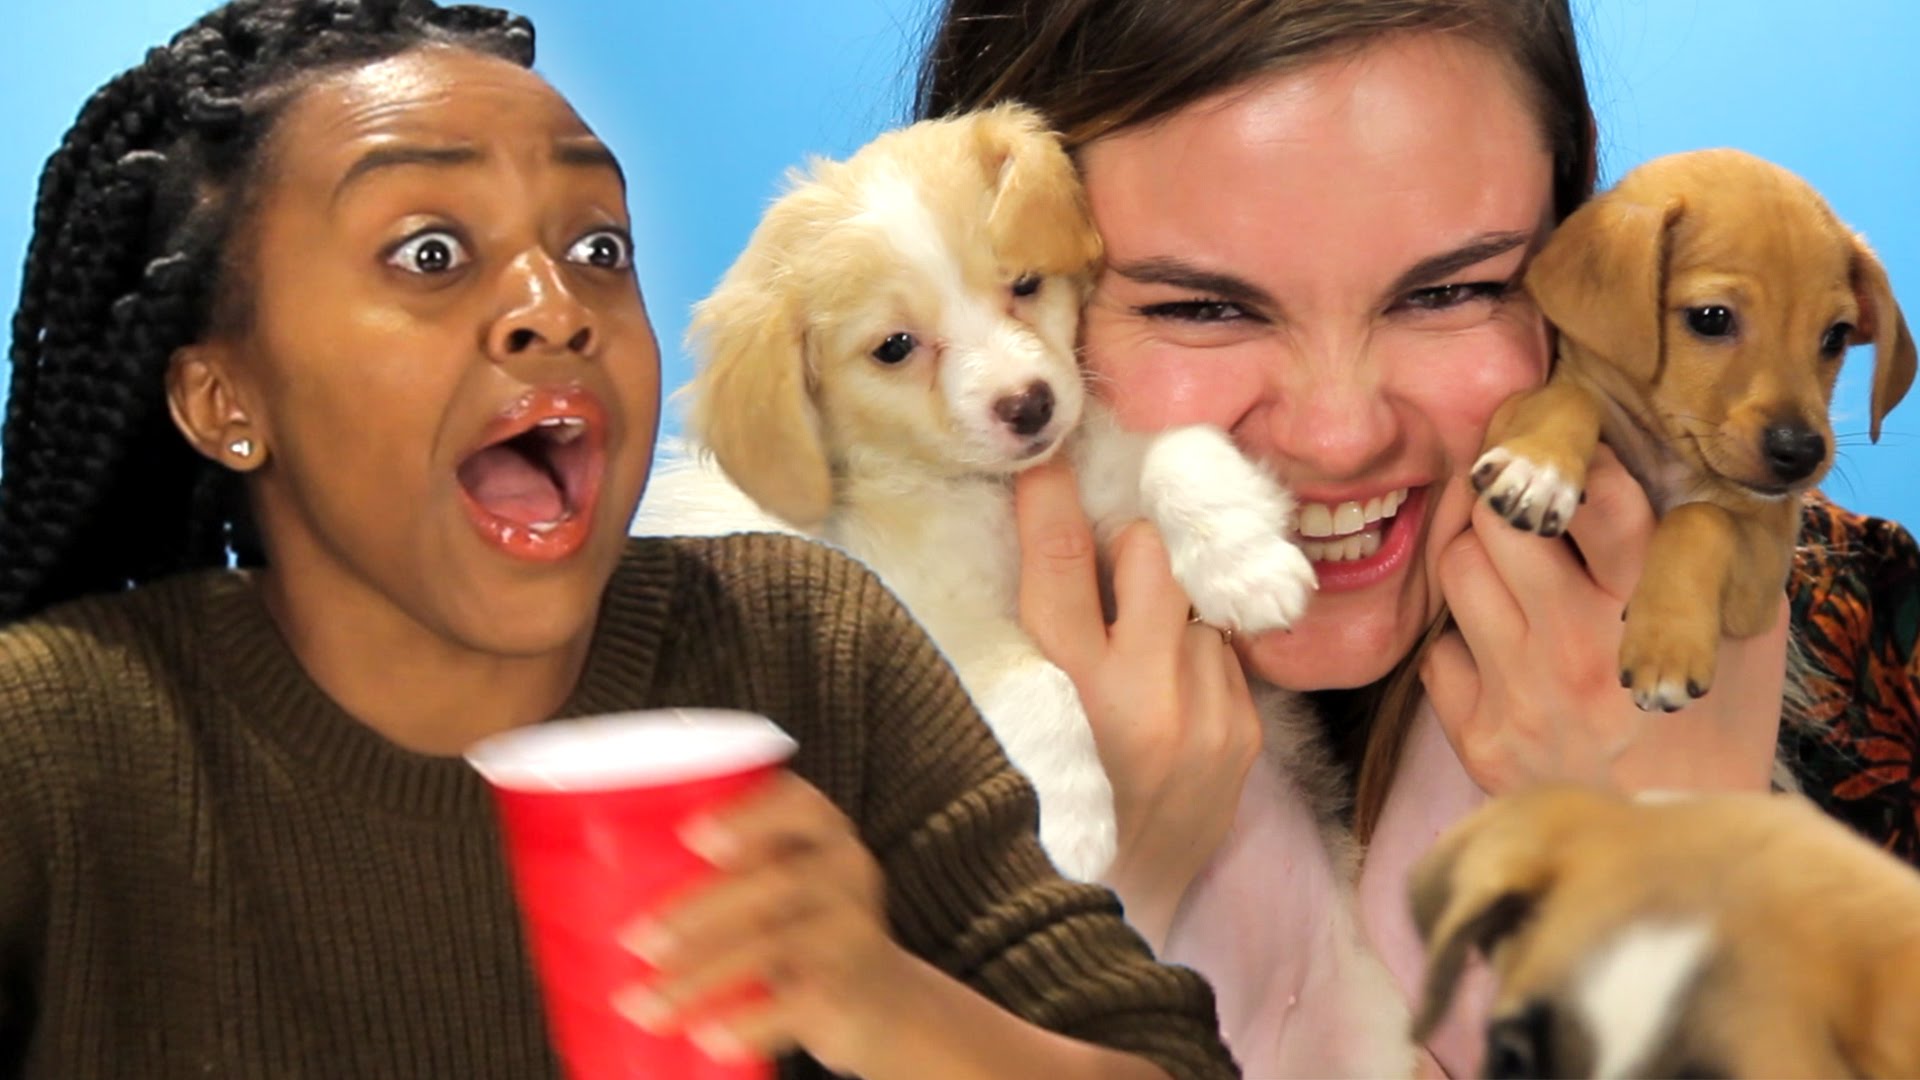 Drunk Girls Get Surprised With Puppies - YouTube